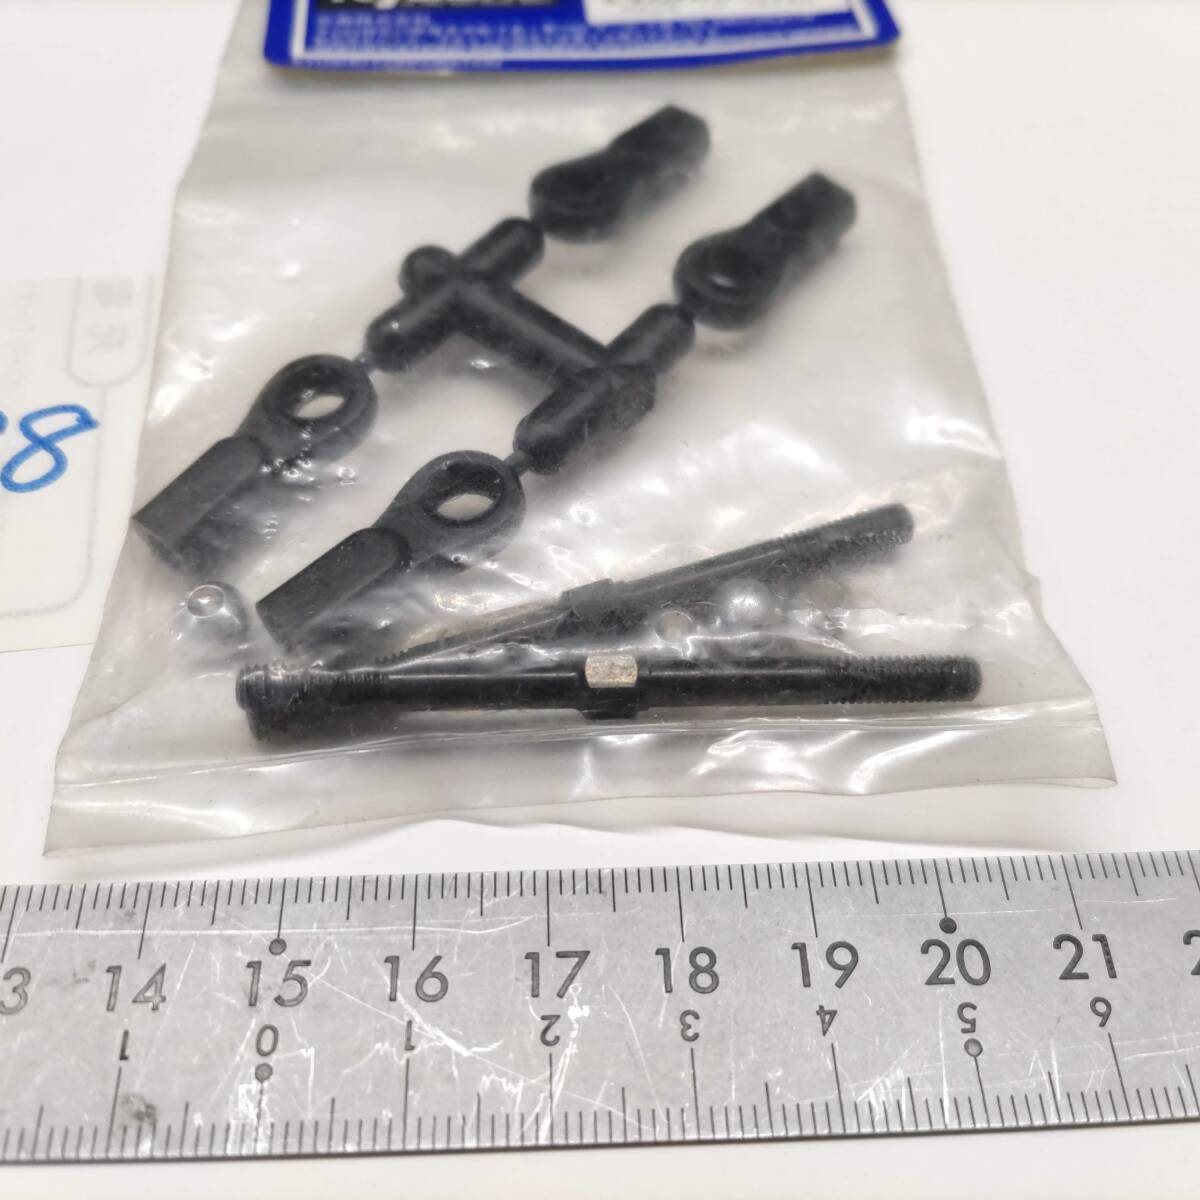 S088　KYOSHO 京商　BSW35 タイロッドSP　Special tie rod　未開封 長期保管品_画像5